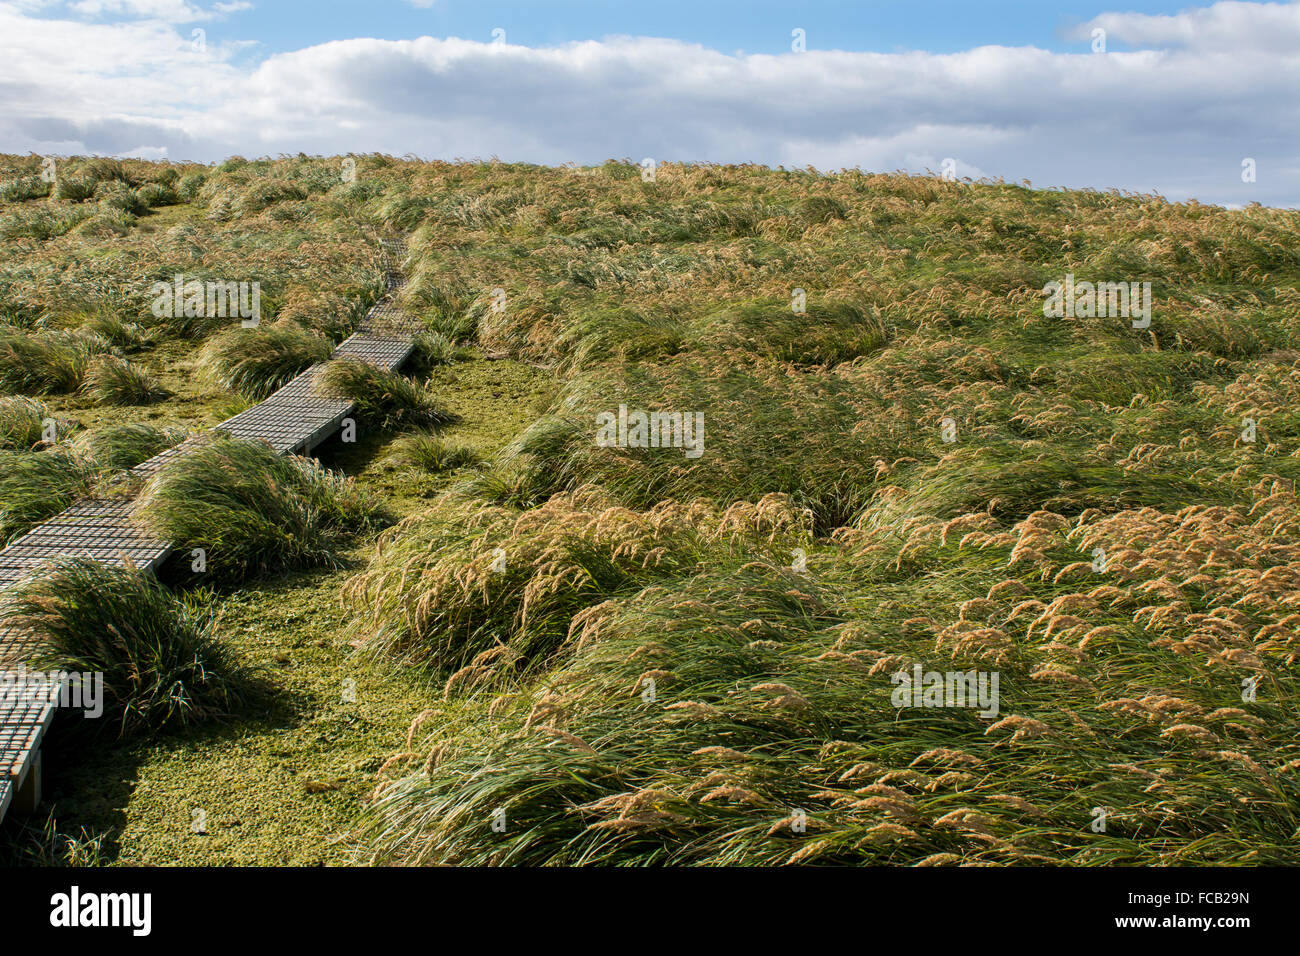 New Zealand, Auckland Islands, uninhabited archipelago in the south Pacific Ocean, Enderby Island. Tussac grass (Poa litorosa). Stock Photo